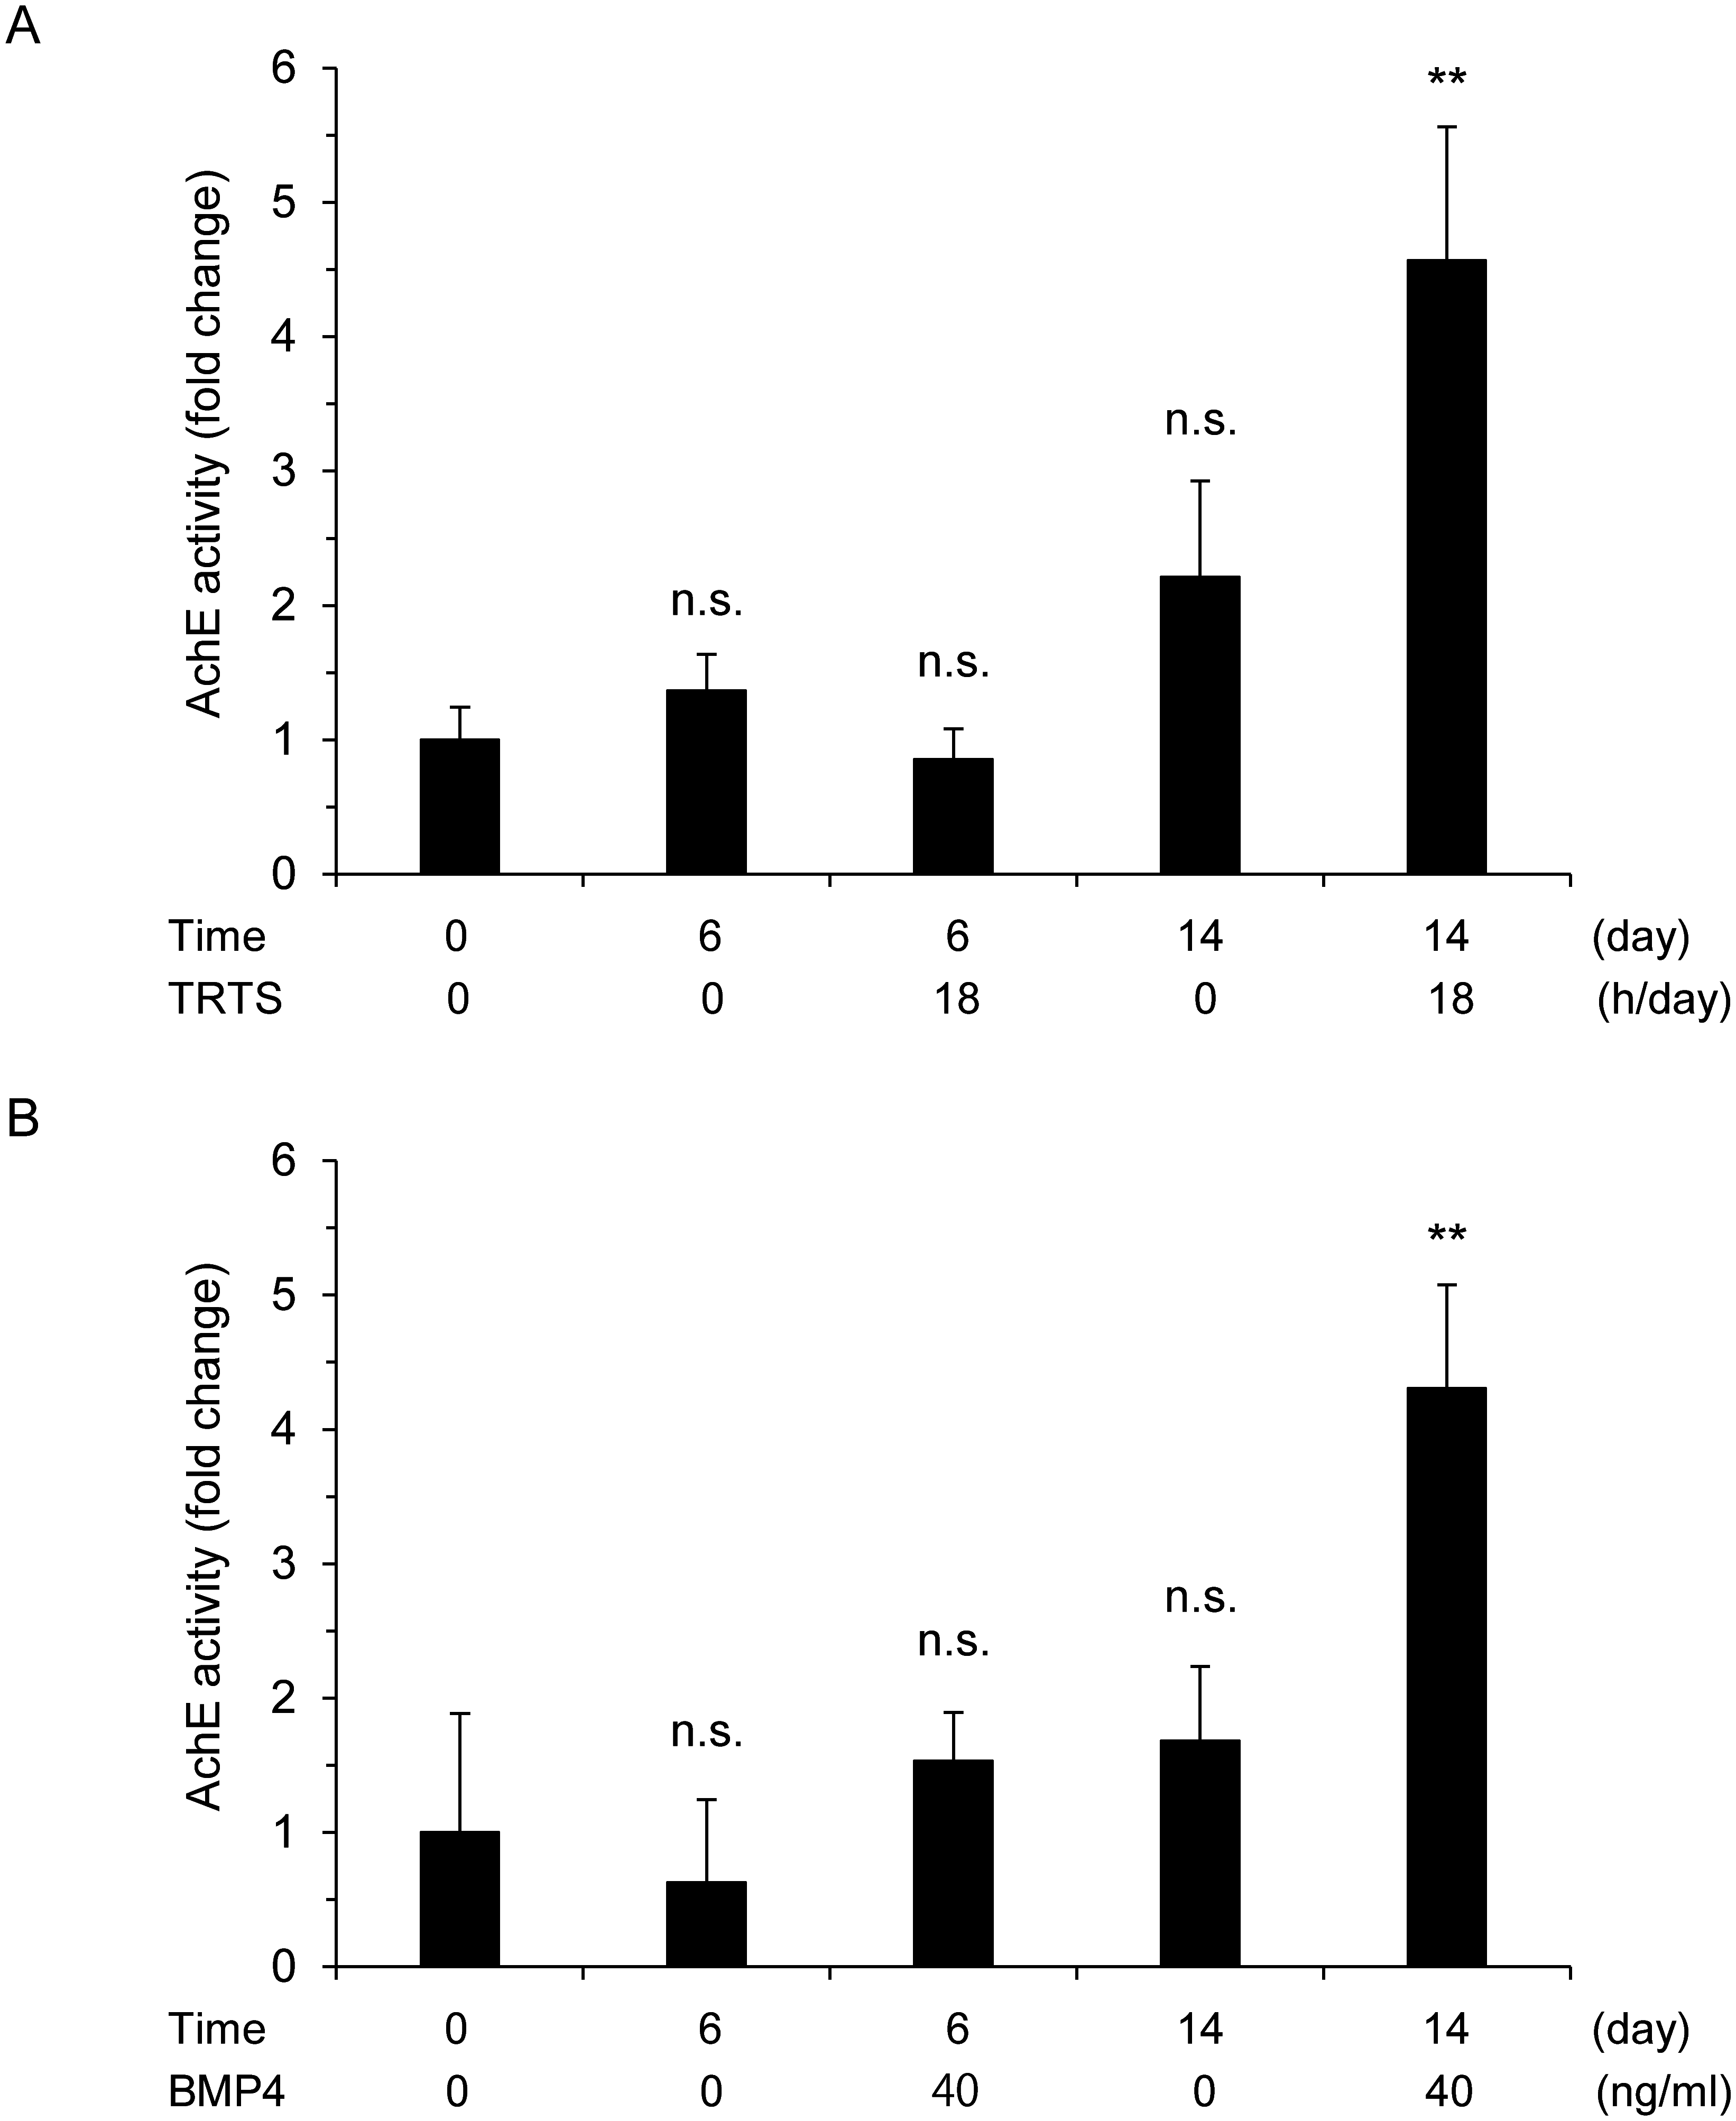 Time course of TRTS-induced AChE activity in PC12 cells. To examine AChE activity (a biochemical marker for neuronal differentiation) in PC12 cells, the choline produced from acetylcholine by endogenous AChE in each sample was quantified using the Amplite Fluorimetric Acetylcholine Esterase Assay Kit (AAT Bioquest, Sunnyvale, CA, USA) with ReadiUse mammalian cell lysis buffer *5X* (AAT Bioquest) in accordance with the manufacturer’s instructions. Cell lysates from PC12 cells in the differentiation medium were prepared and analyzed for acetylcholine esterase (AChE) activity after treatment with TRTS at 39.5°C (18 h/day) or 40 ng/ml BMP4 for the indicated number of days. The data represent the mean ± SD of three replicates. **P < 0.01 vs. the day 0 control with no stimulation. n.s., not significant vs. the day 0 control with no treatment. BMP4, bone morphogenetic protein 4, TRTS, temperature-controlled repeated thermal stimulation. Source: <b>Induction of Neurite Outgrowth in PC12 Cells Treated with Temperature-Controlled Repeated Thermal Stimulation</b> by Kudo, Tada-aki et.al., <em>PloS one</em>, April 2015